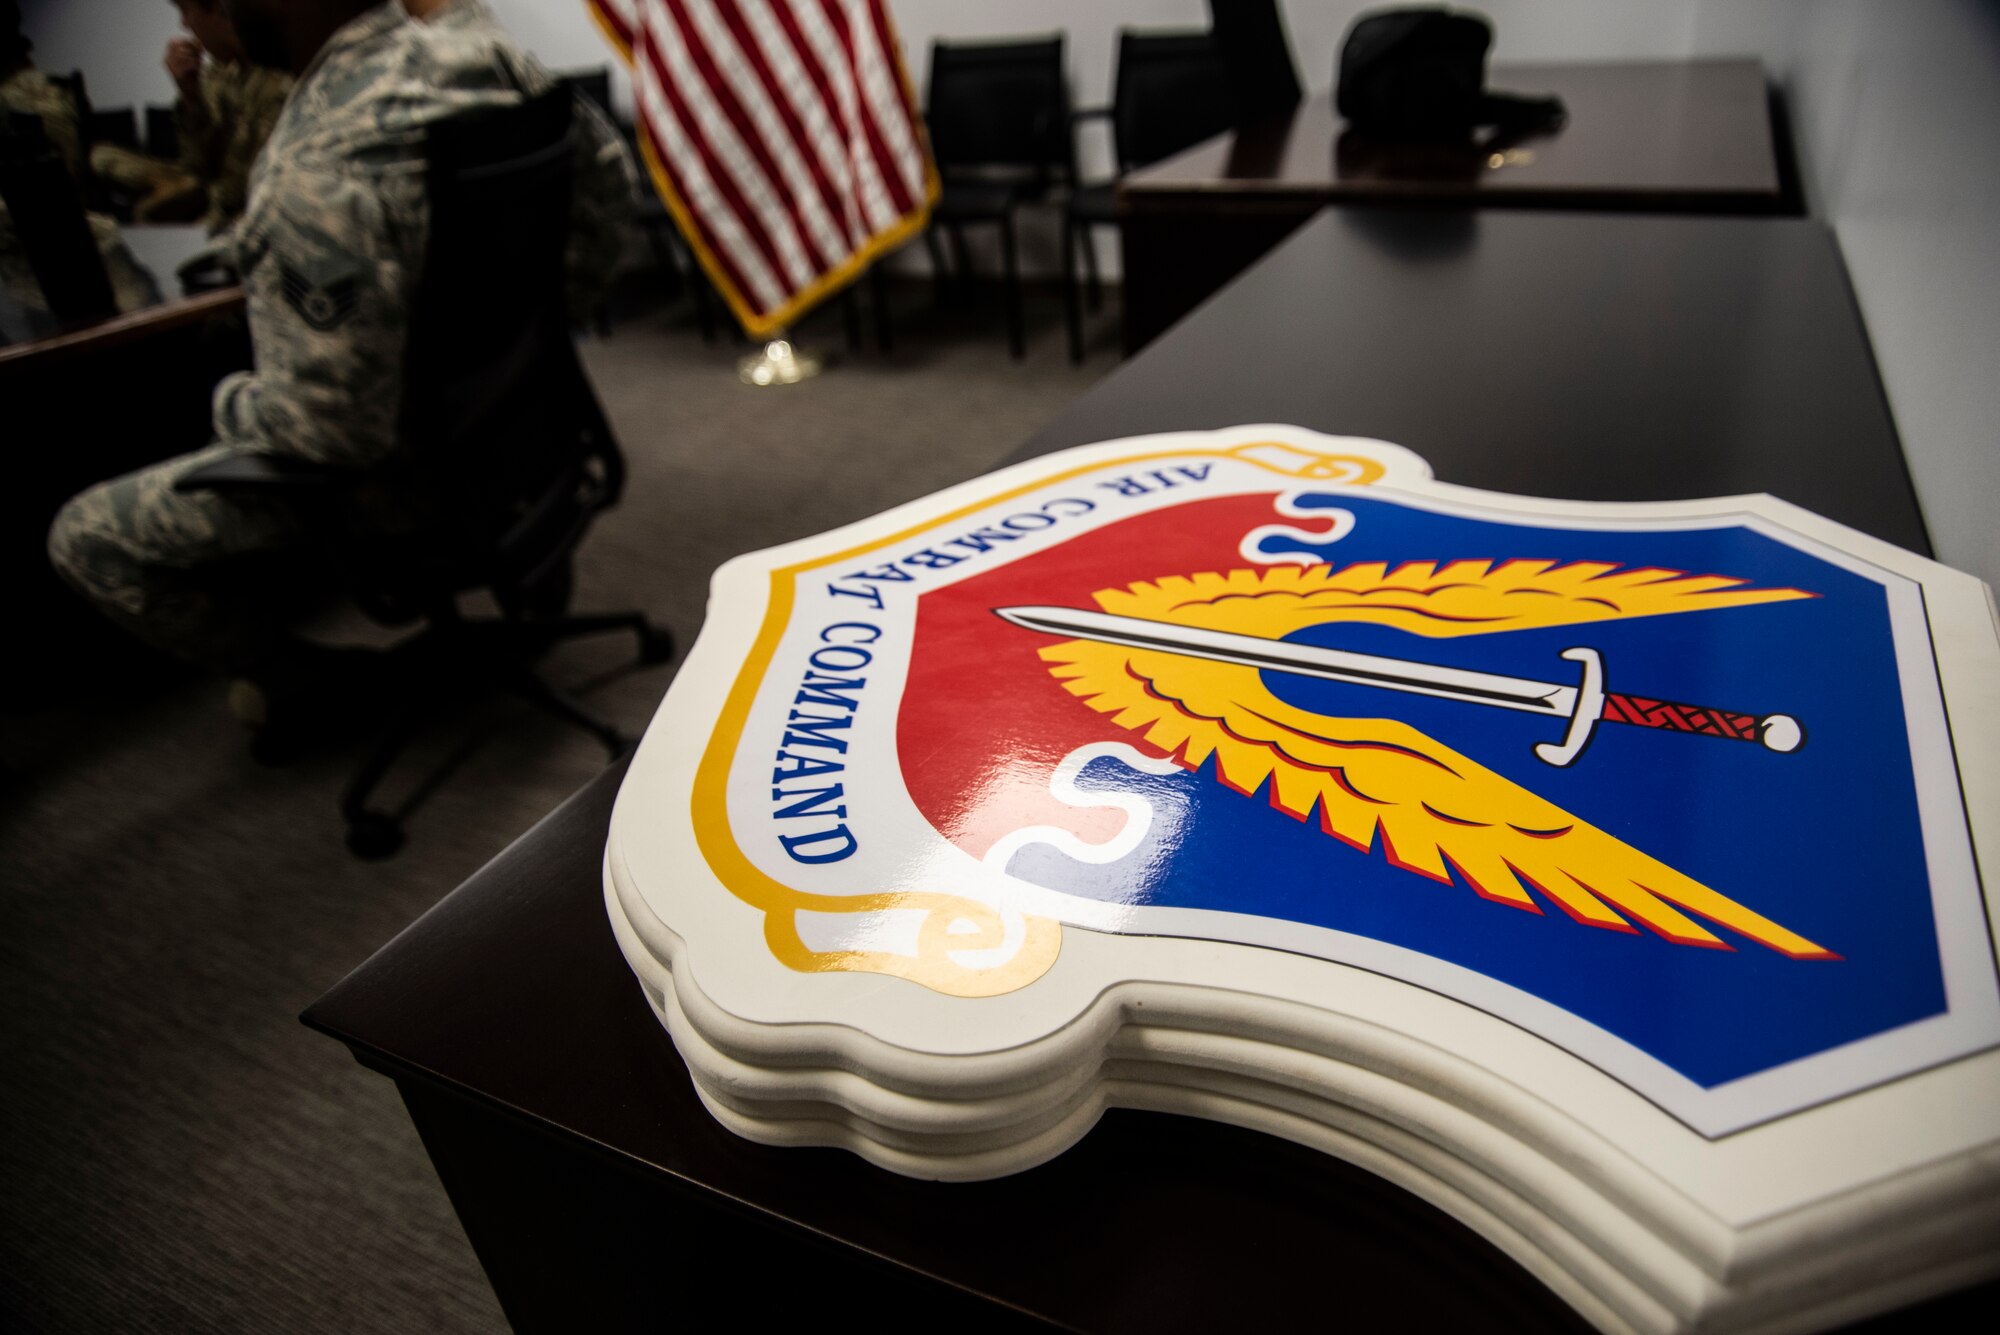 The shield for U.S. Air Force Air Combat Command is pictured Nov. 8, 2019, at Tyndall Air Force Base, Florida. The 53rd Test Support Squadron facilitated an immersion tour for members assigned to the 325th Fighter Wing. Airmen visited multiple units of the 53rd Weapons Evaluation Group during the tour. The group was also participating in the Weapons System Evaluation Program and Checkered Flag 20-1 exercise on Tyndall's flight line. Attendees also learned about the unit's joint partnership with Tyndall, ensuring Airmen are trained and equipment is tested, to support the warfighter. (U.S. Air Force photo by Staff Sgt. Magen M. Reeves)